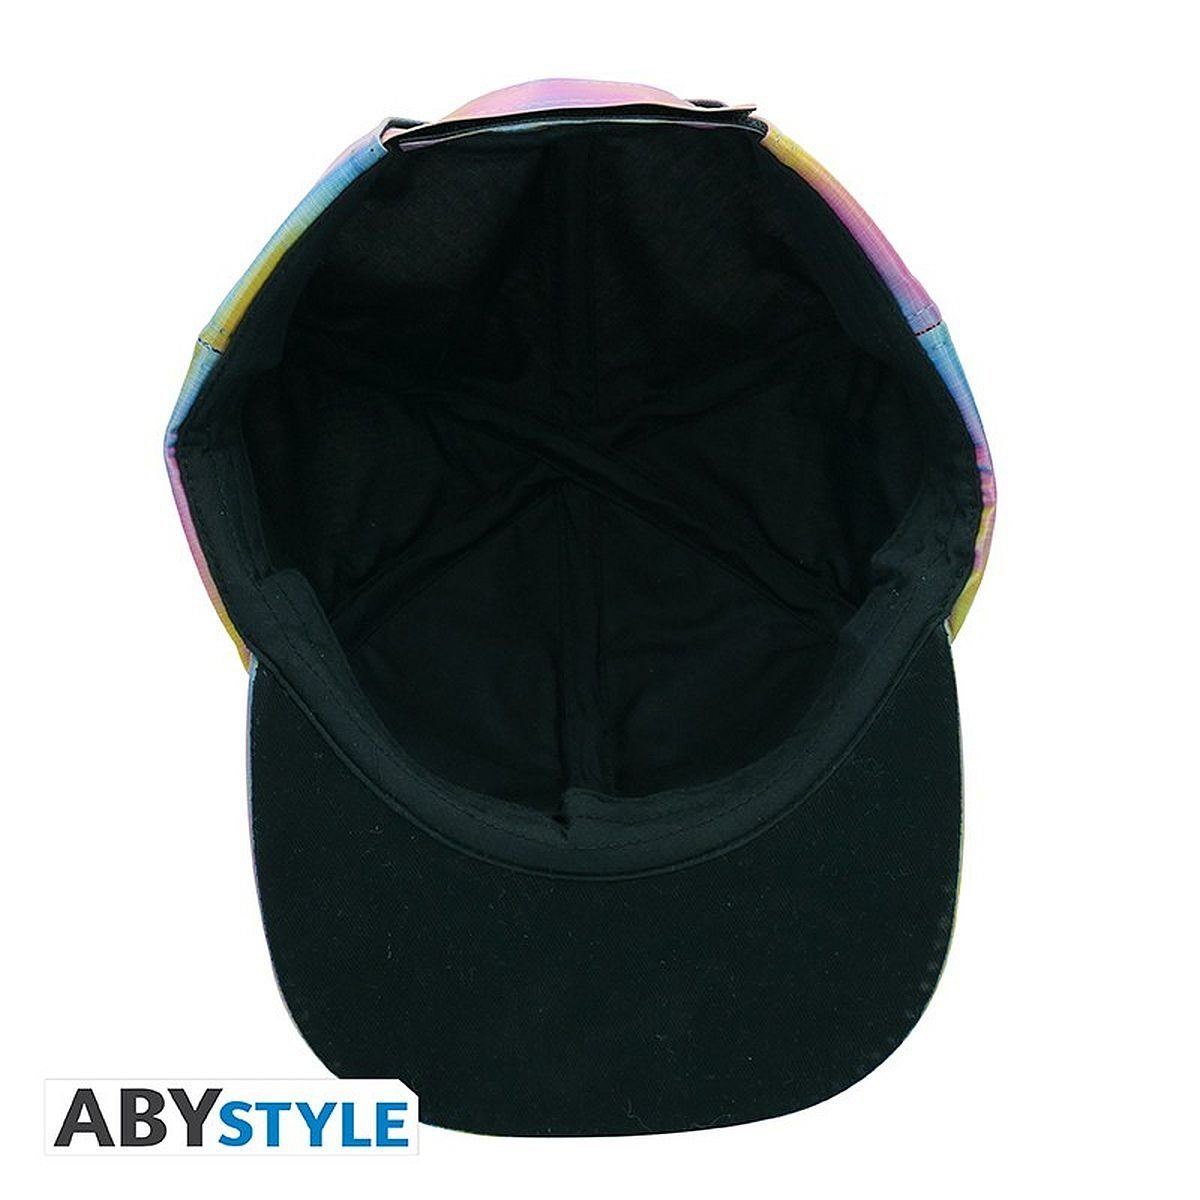 ABYstyle Flat Cap Zurück McFly Marty die Future in Cap the to Zukunft Back